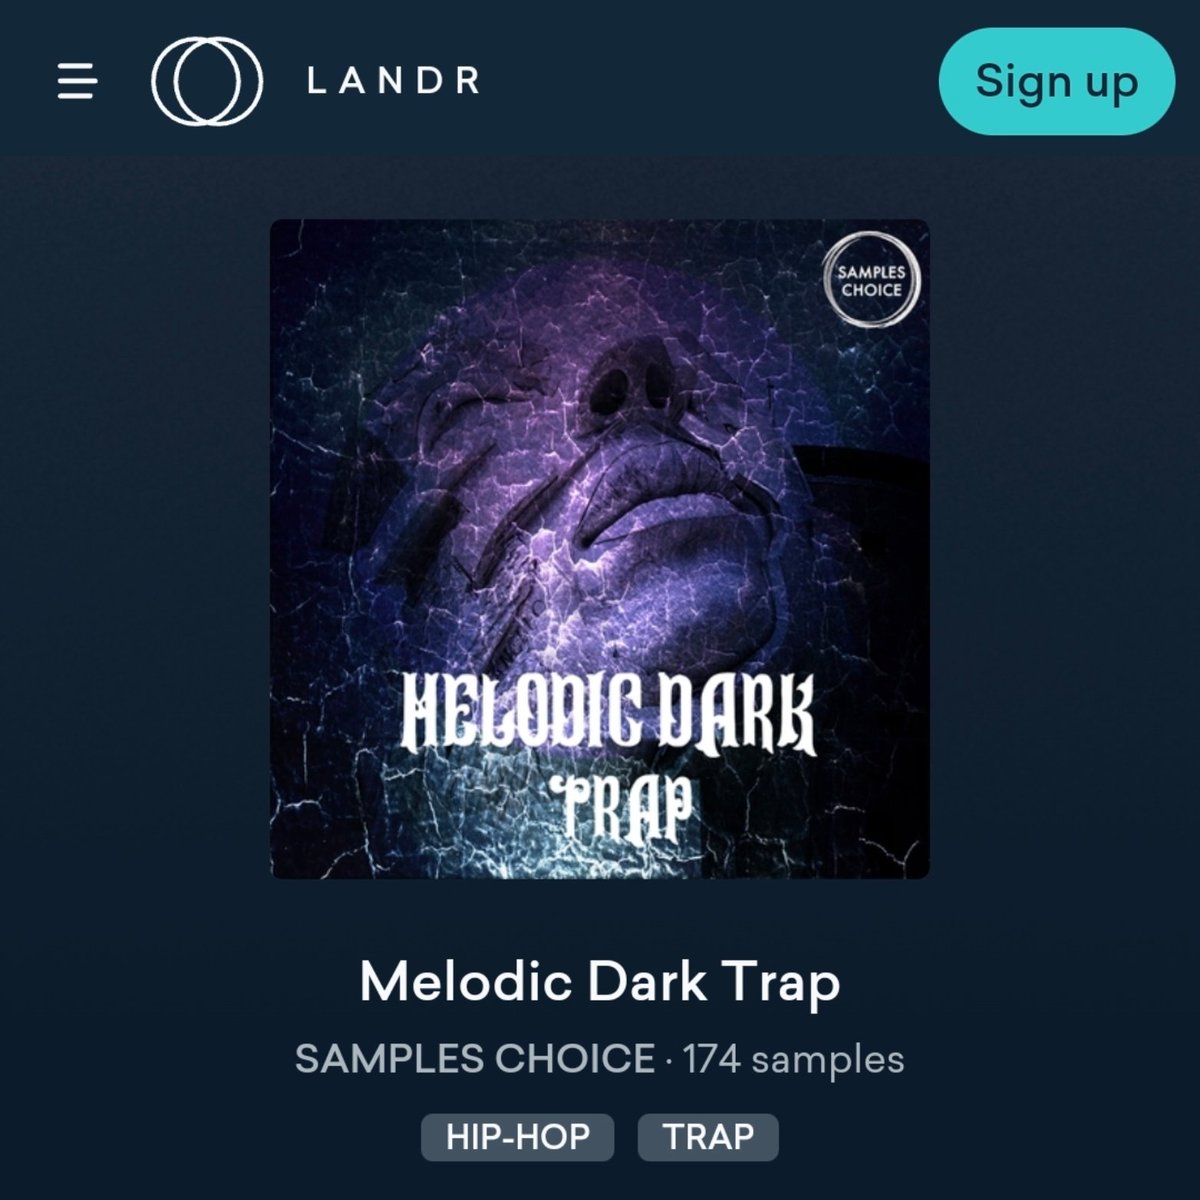 Melodic Dark Trap
Out now on @LANDR_music
samples.landr.com/packs/melodic-…
#trapmusic #trapbeats #drillmusic #drillbeats #traplove #trappiano #trapvibes #hiphopbeats #musicproducer #producerlife #producerlifestyle #typebeat  #ableton #hiphopproducer #beatproducer #typebeats #melodictrap